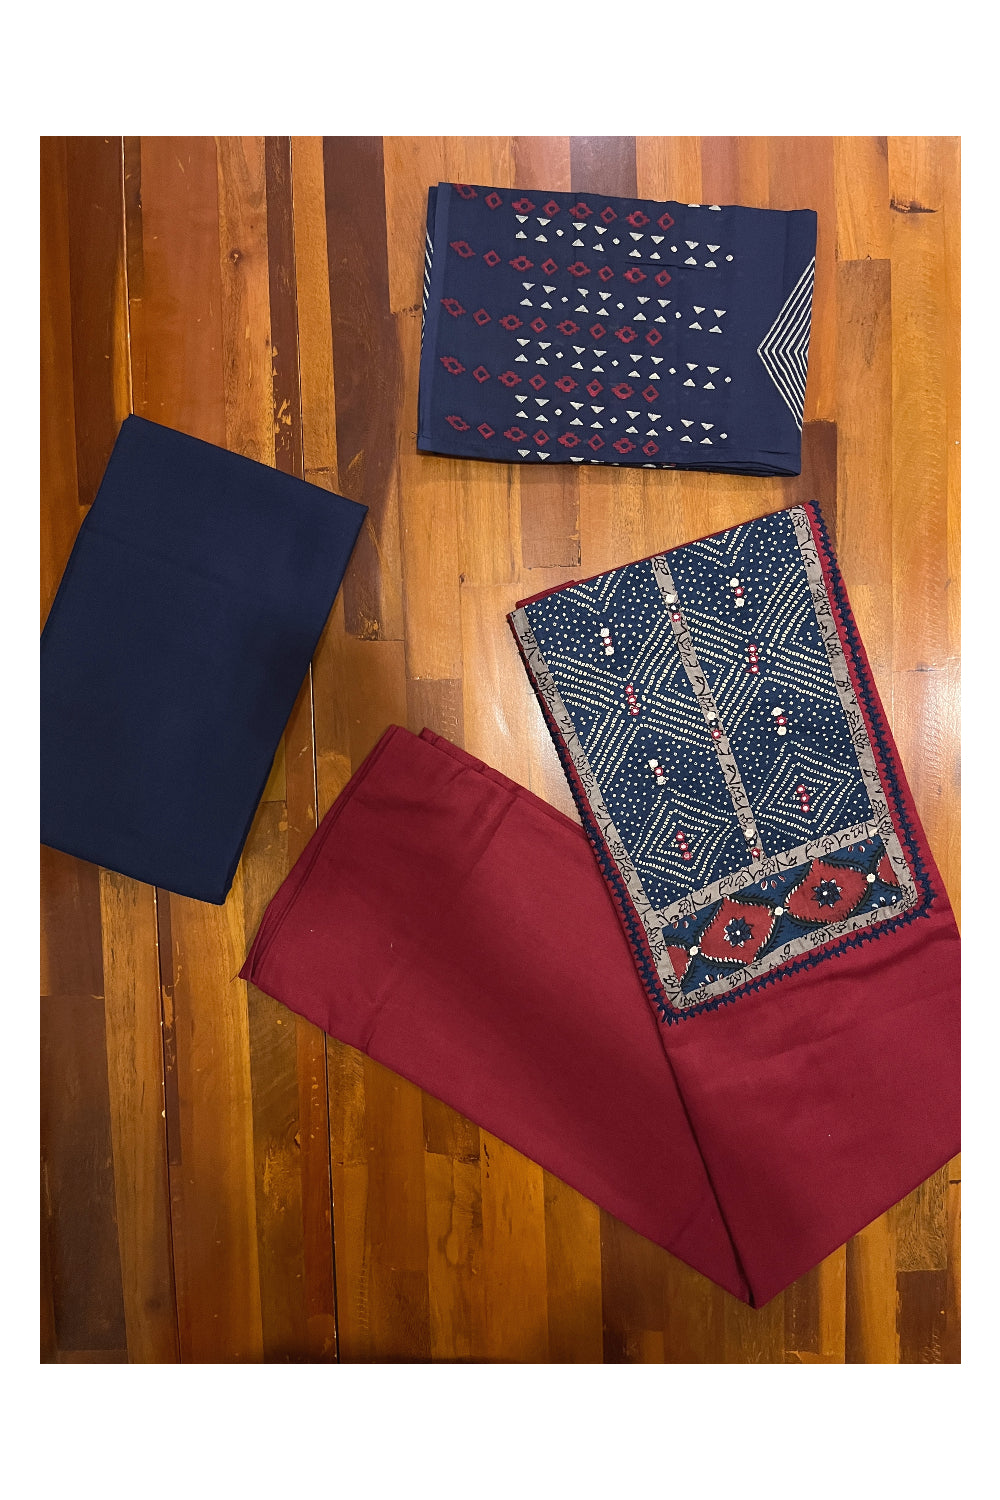 Southloom™ Cotton Churidar Salwar Suit Material in Maroon with Blue Prints